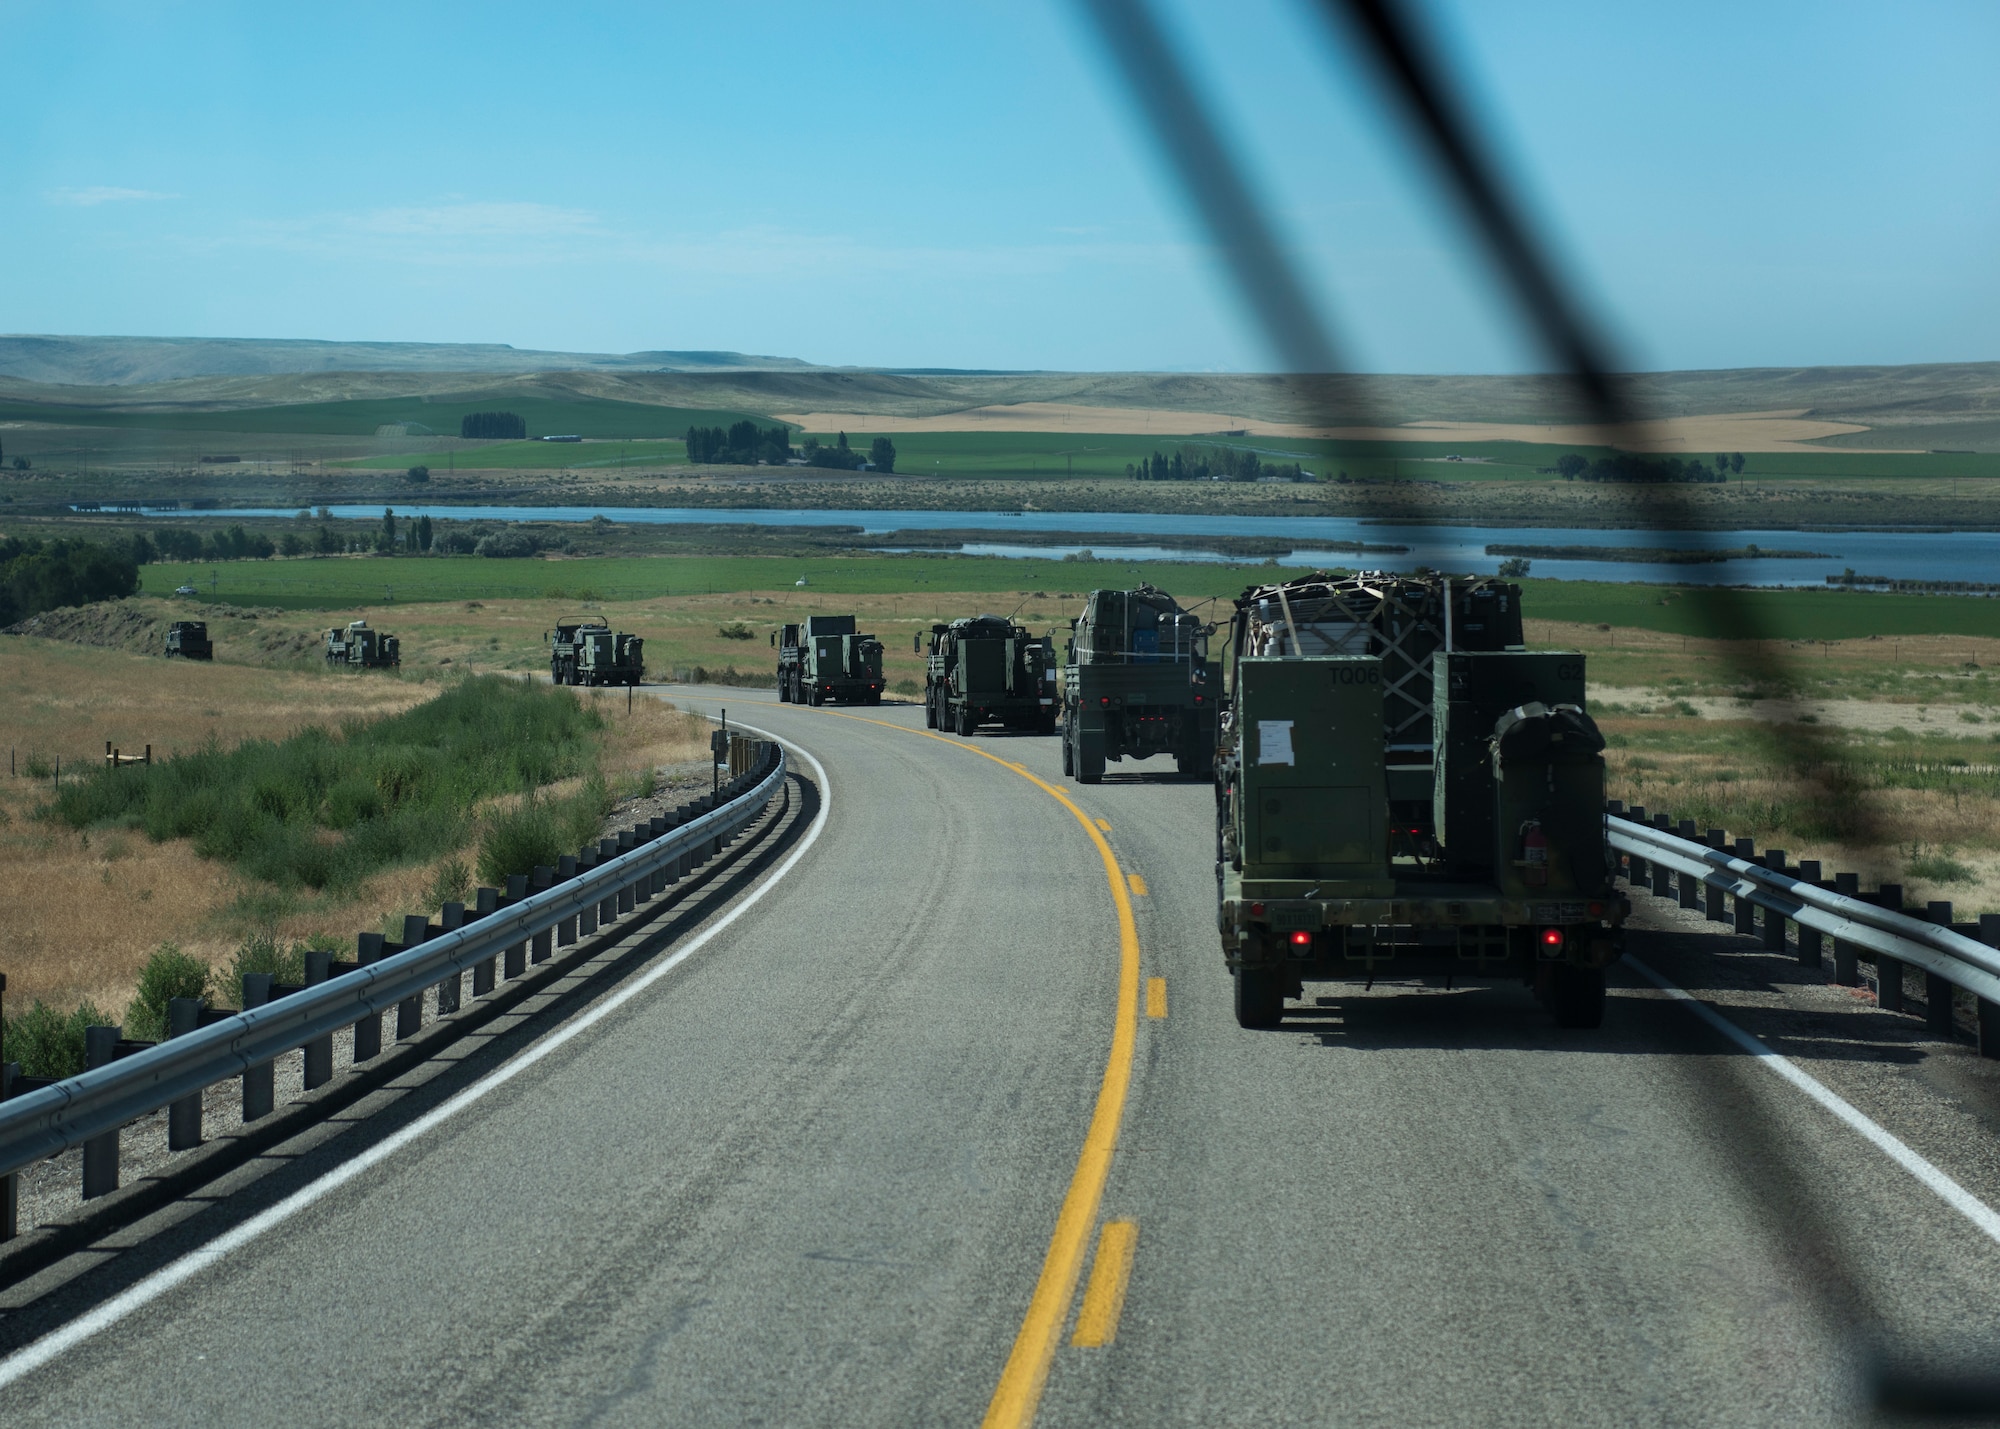 A U.S. Air Force convoy of 5-ton trucks from the 726th Air Control Squadron transports a variety of equipment July 14, 2019, near Mountain Home Air Force Base, Idaho. This convoy was in support of Hardrock Exercise 19-2, where supplies on the truck enabled the 726th ACS Airmen to set up an entirely self-sufficient base in a simulated remote location. (U.S. Air Force photo by Airman 1st Class Andrew Kobialka)